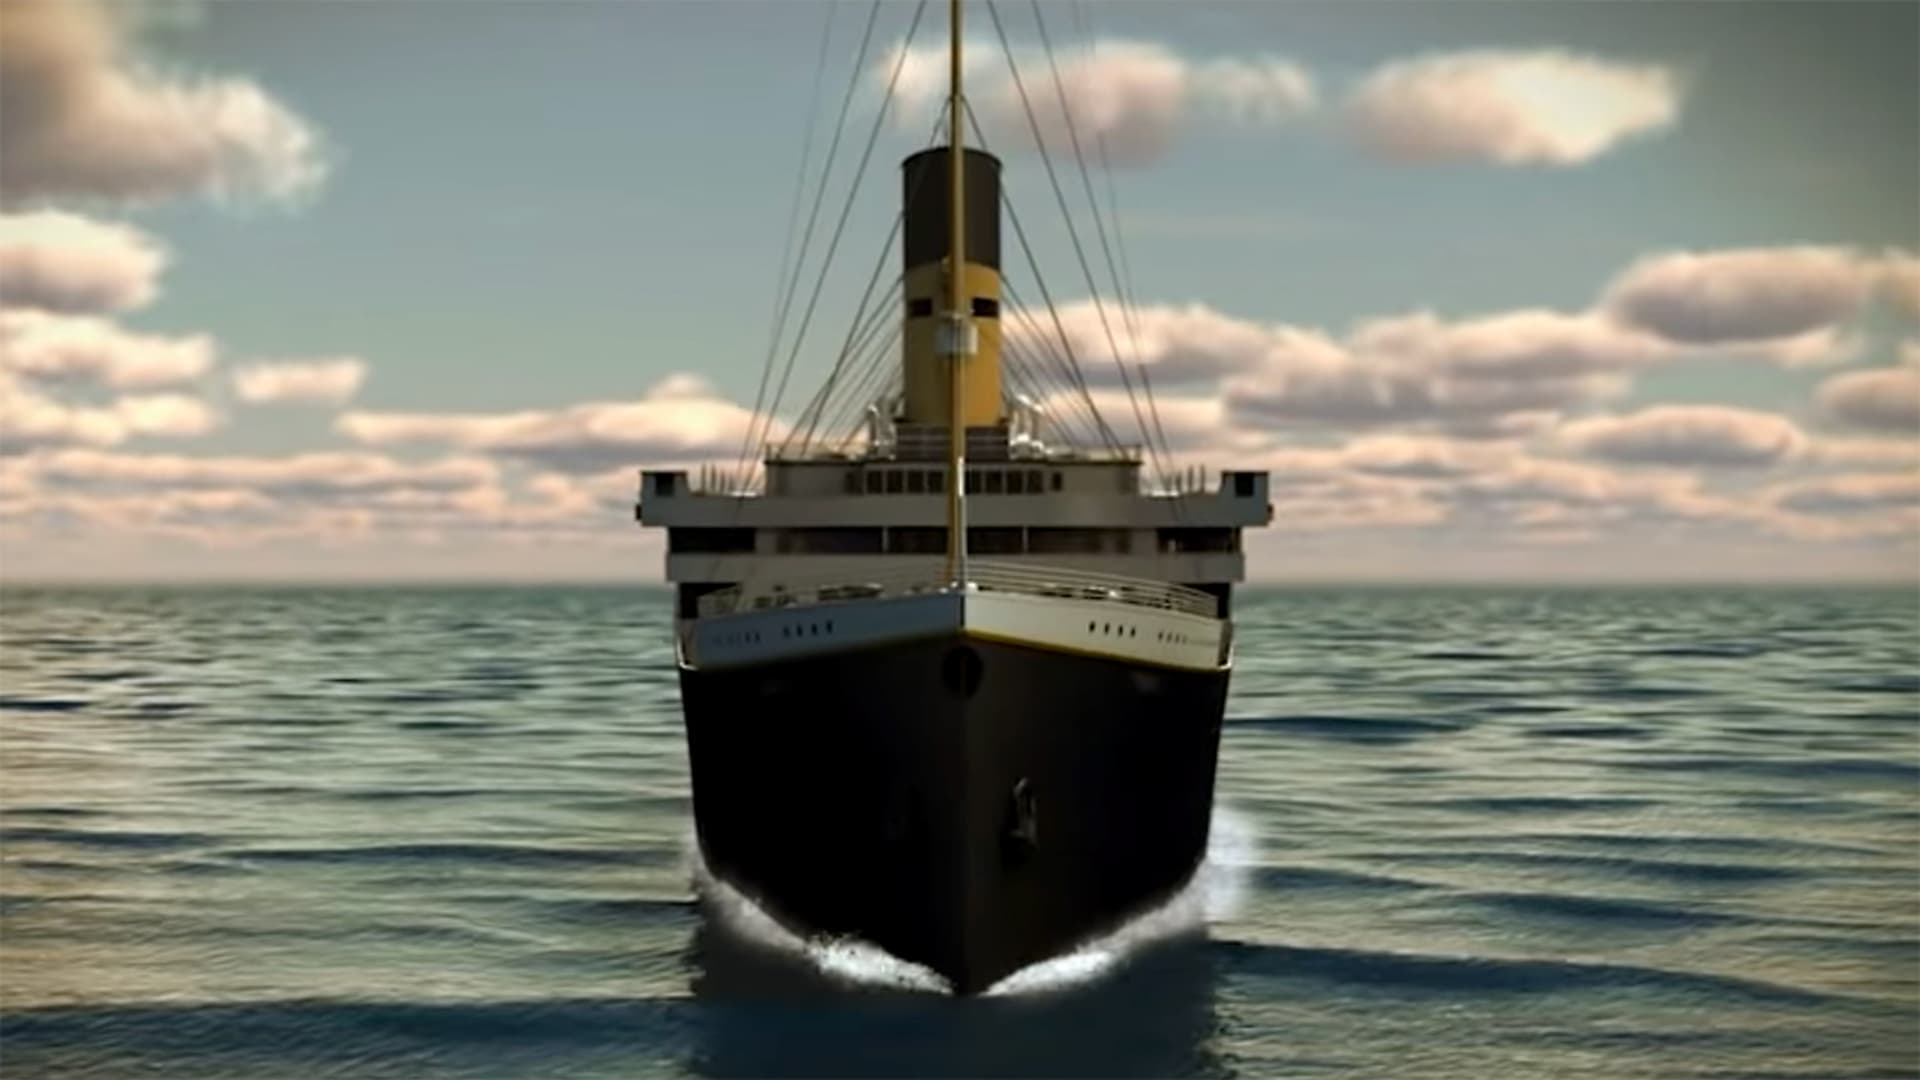 A Chinese-built replica of the Titanic will set sail from Dubai in 2022